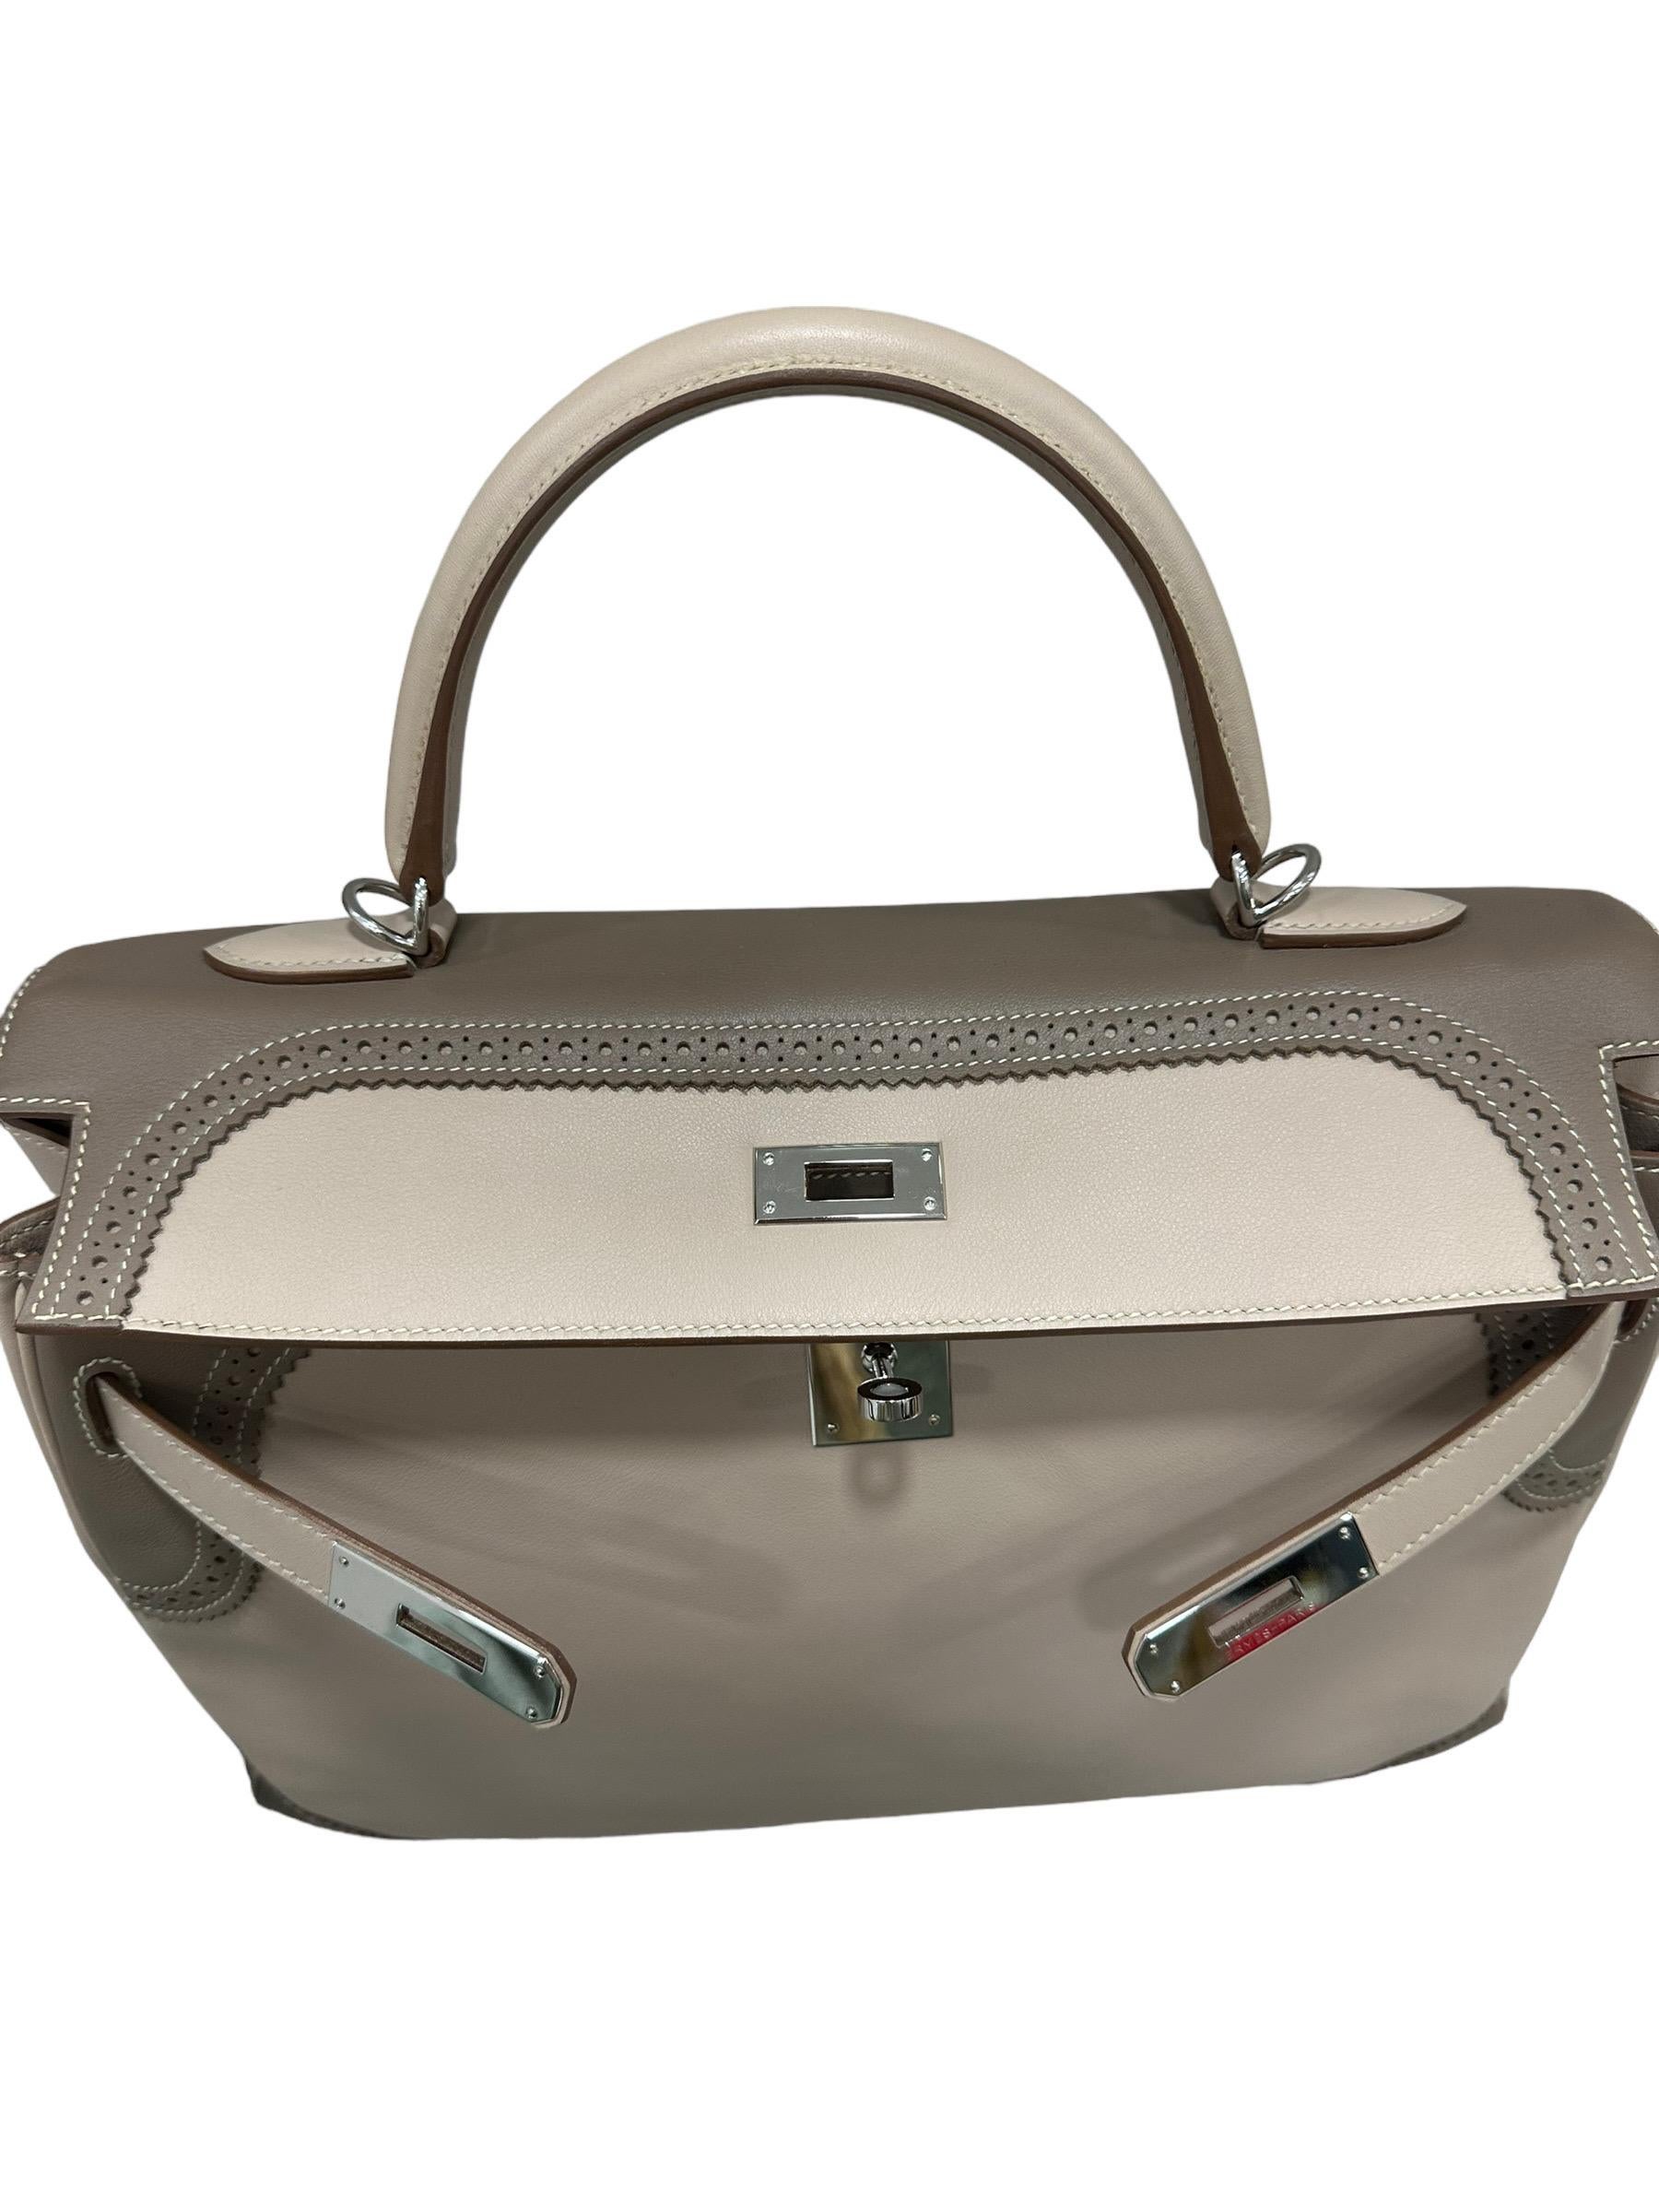 2012 Hermès Kelly 35 Ghillies Evercalf Craie/Taupe For Sale 8